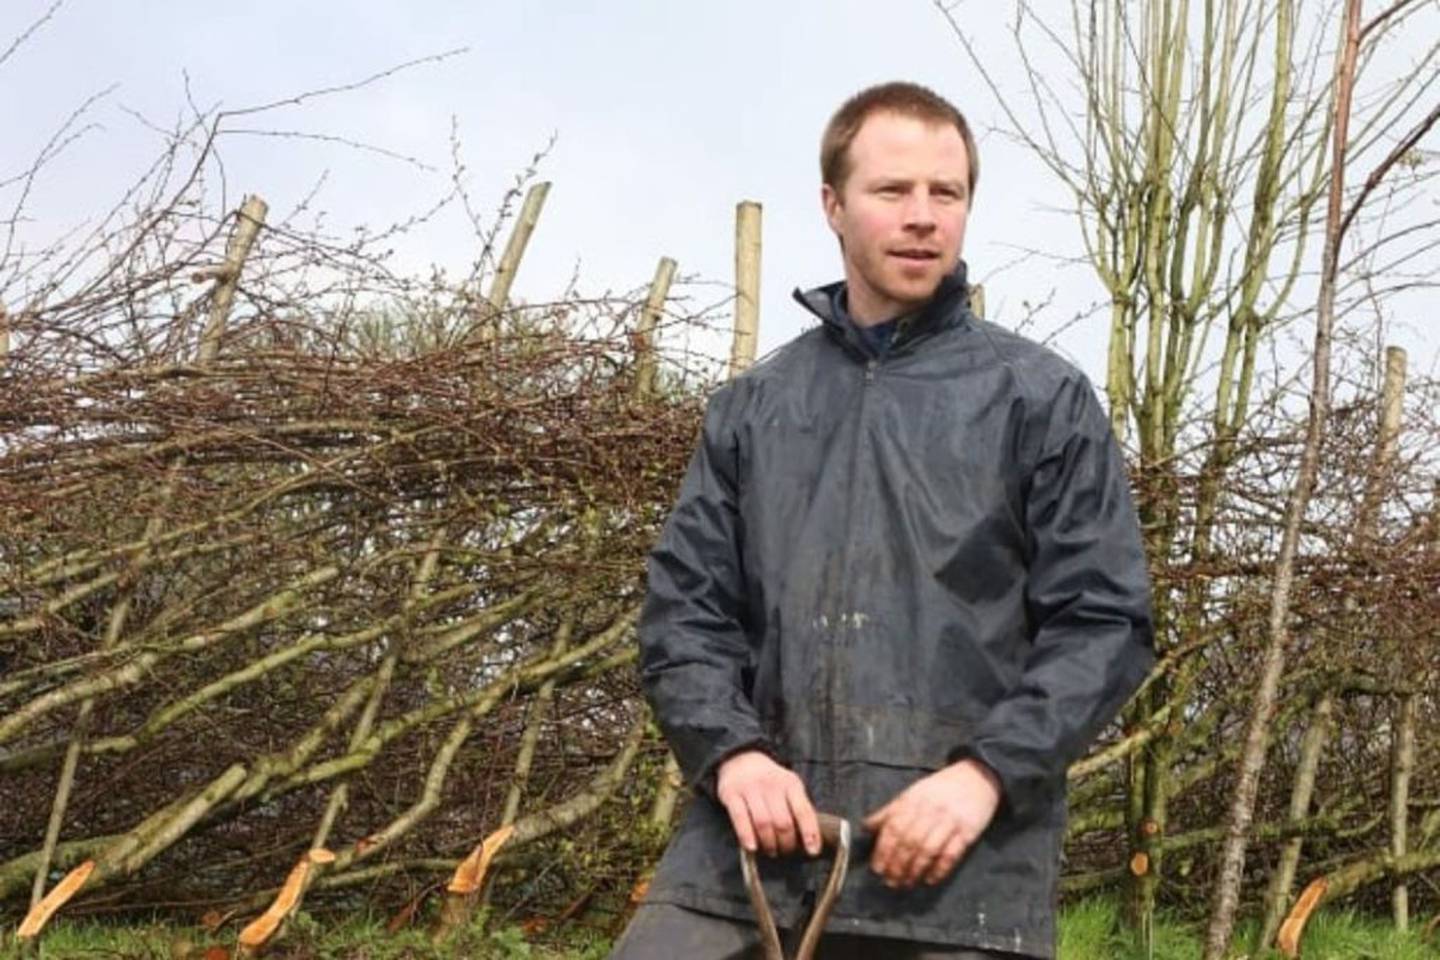 Farmers divided on impact of Nature Restoration Law – The Irish Times